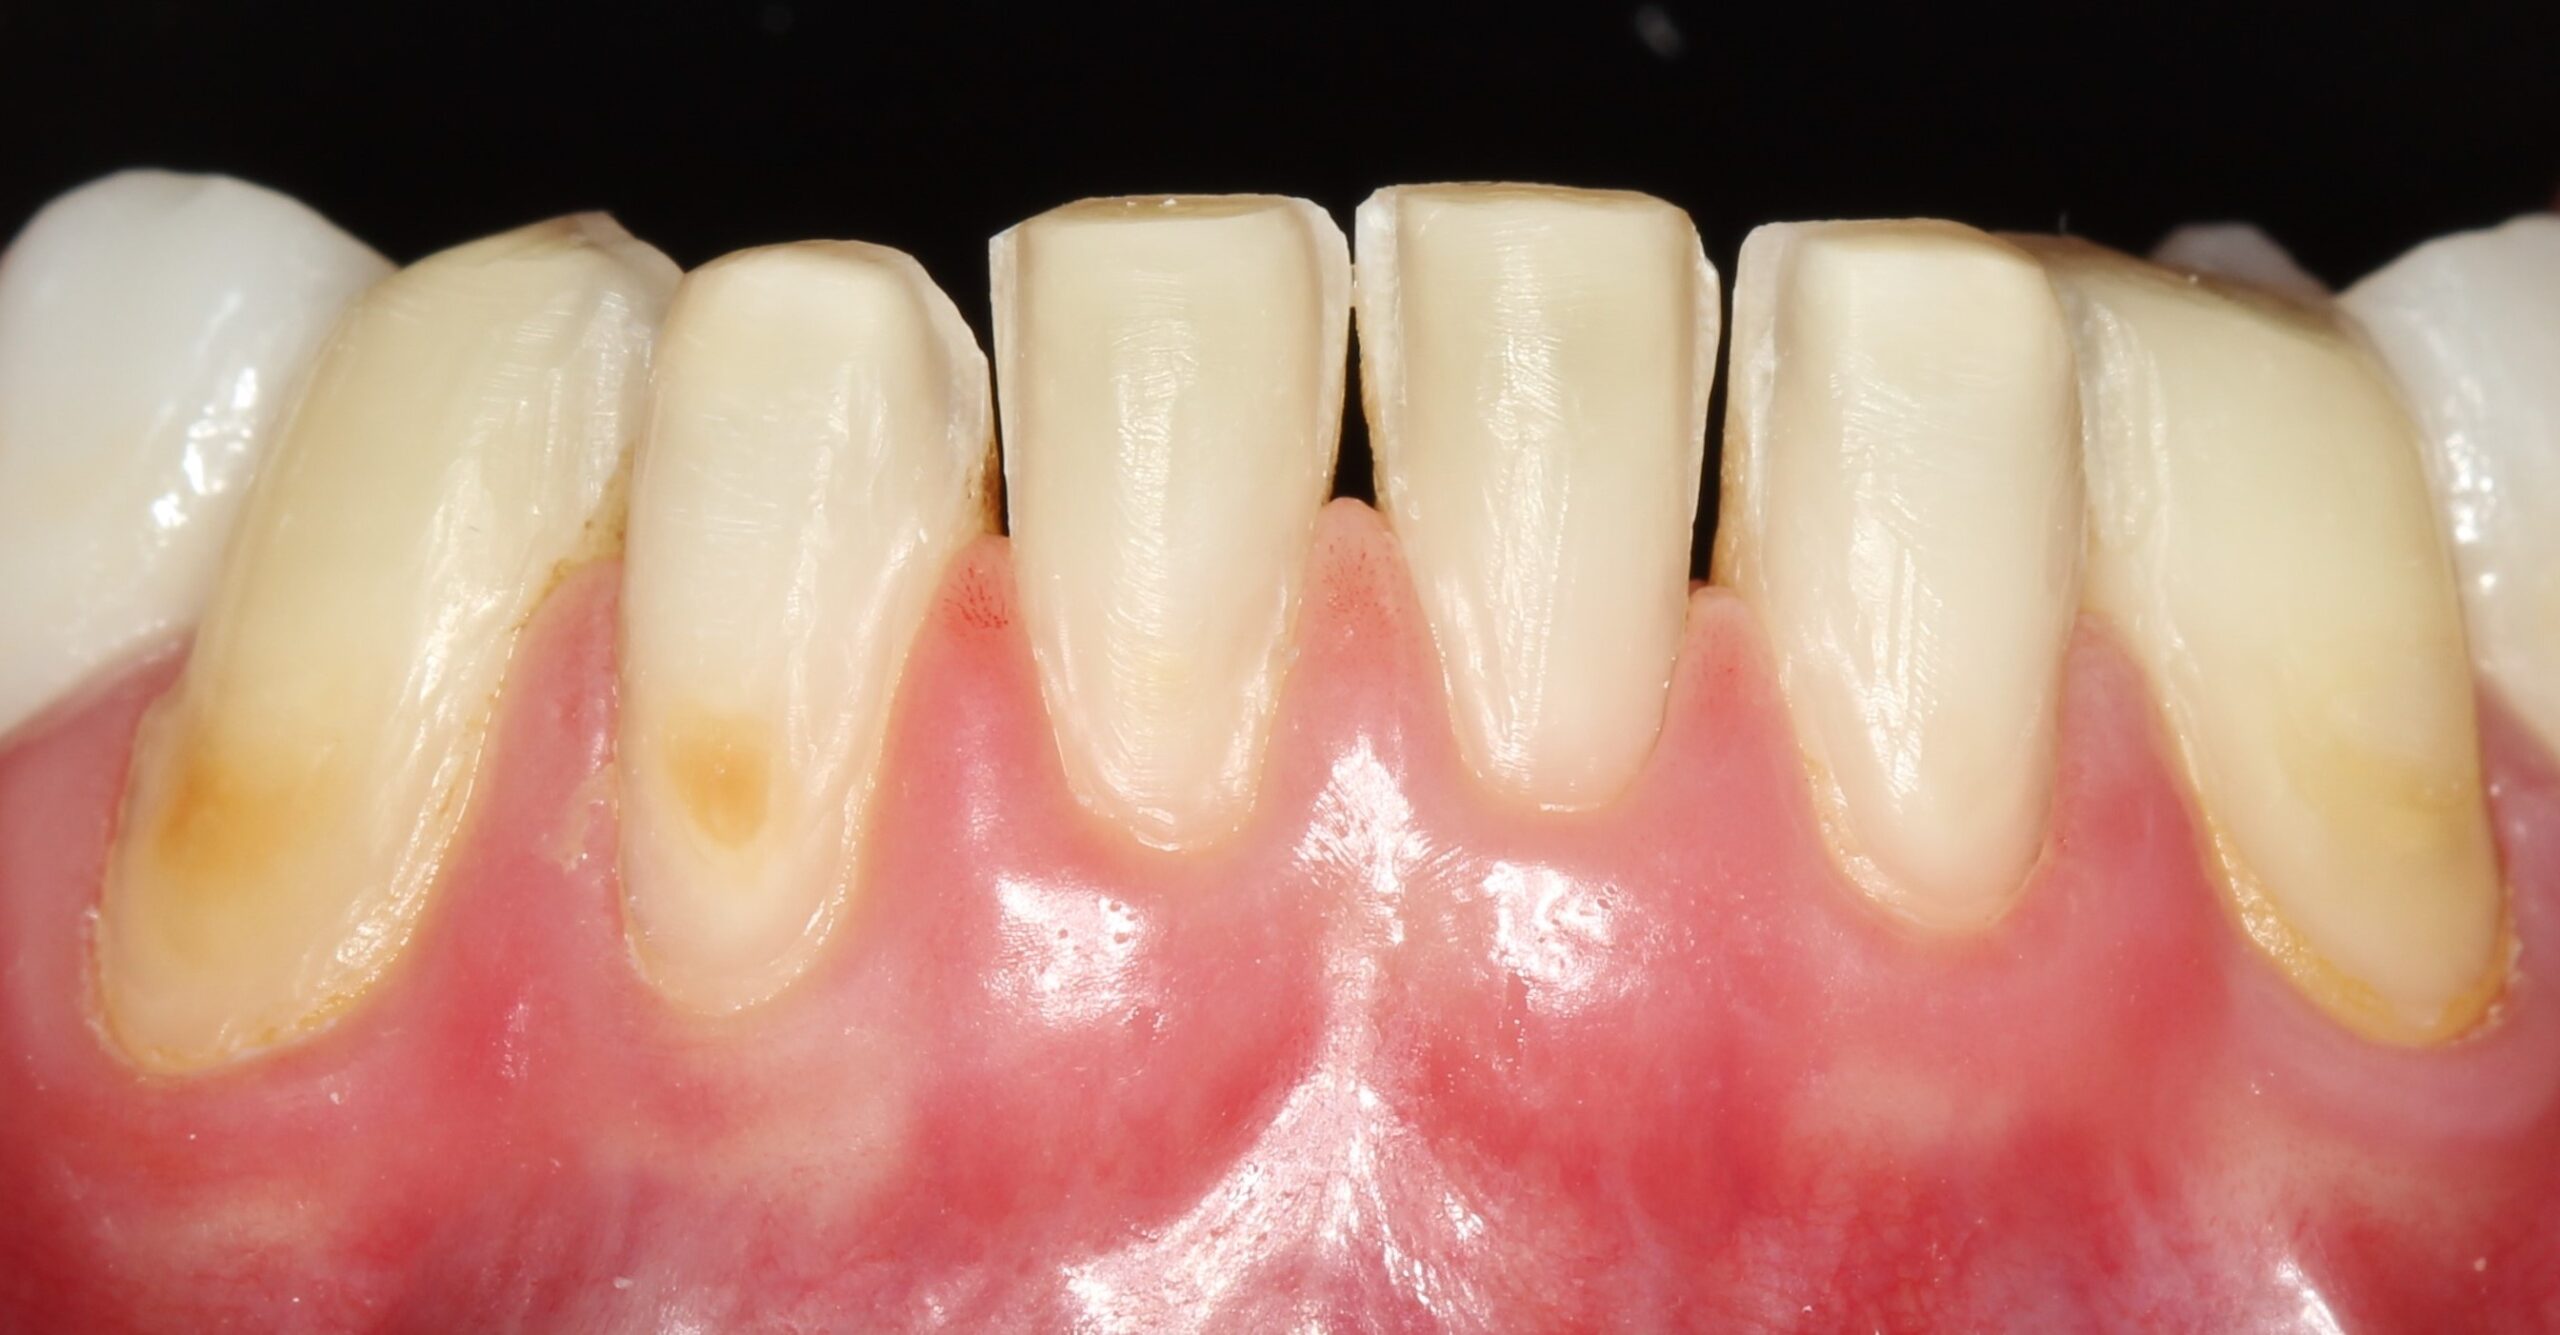 https://mexicoimplantdentistry.com/wp-content/uploads/2022/07/15-scaled.jpg